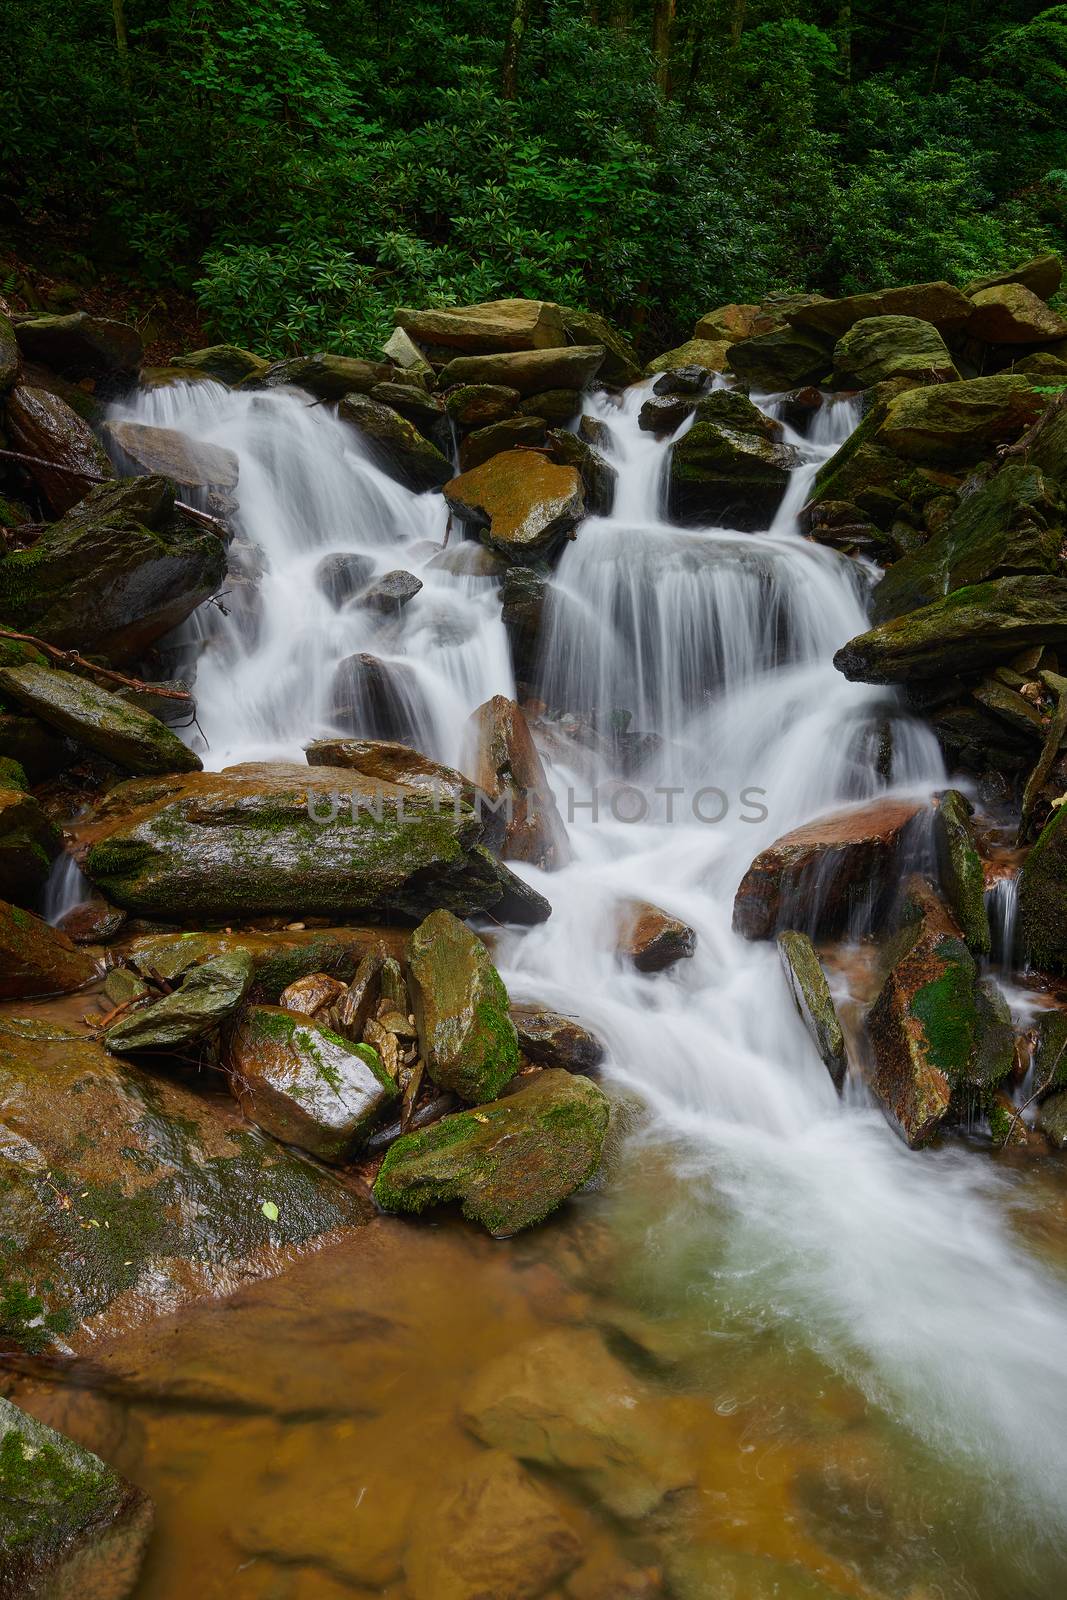 Waterfall pouring over rocks in Pisgah National Forest, NC.